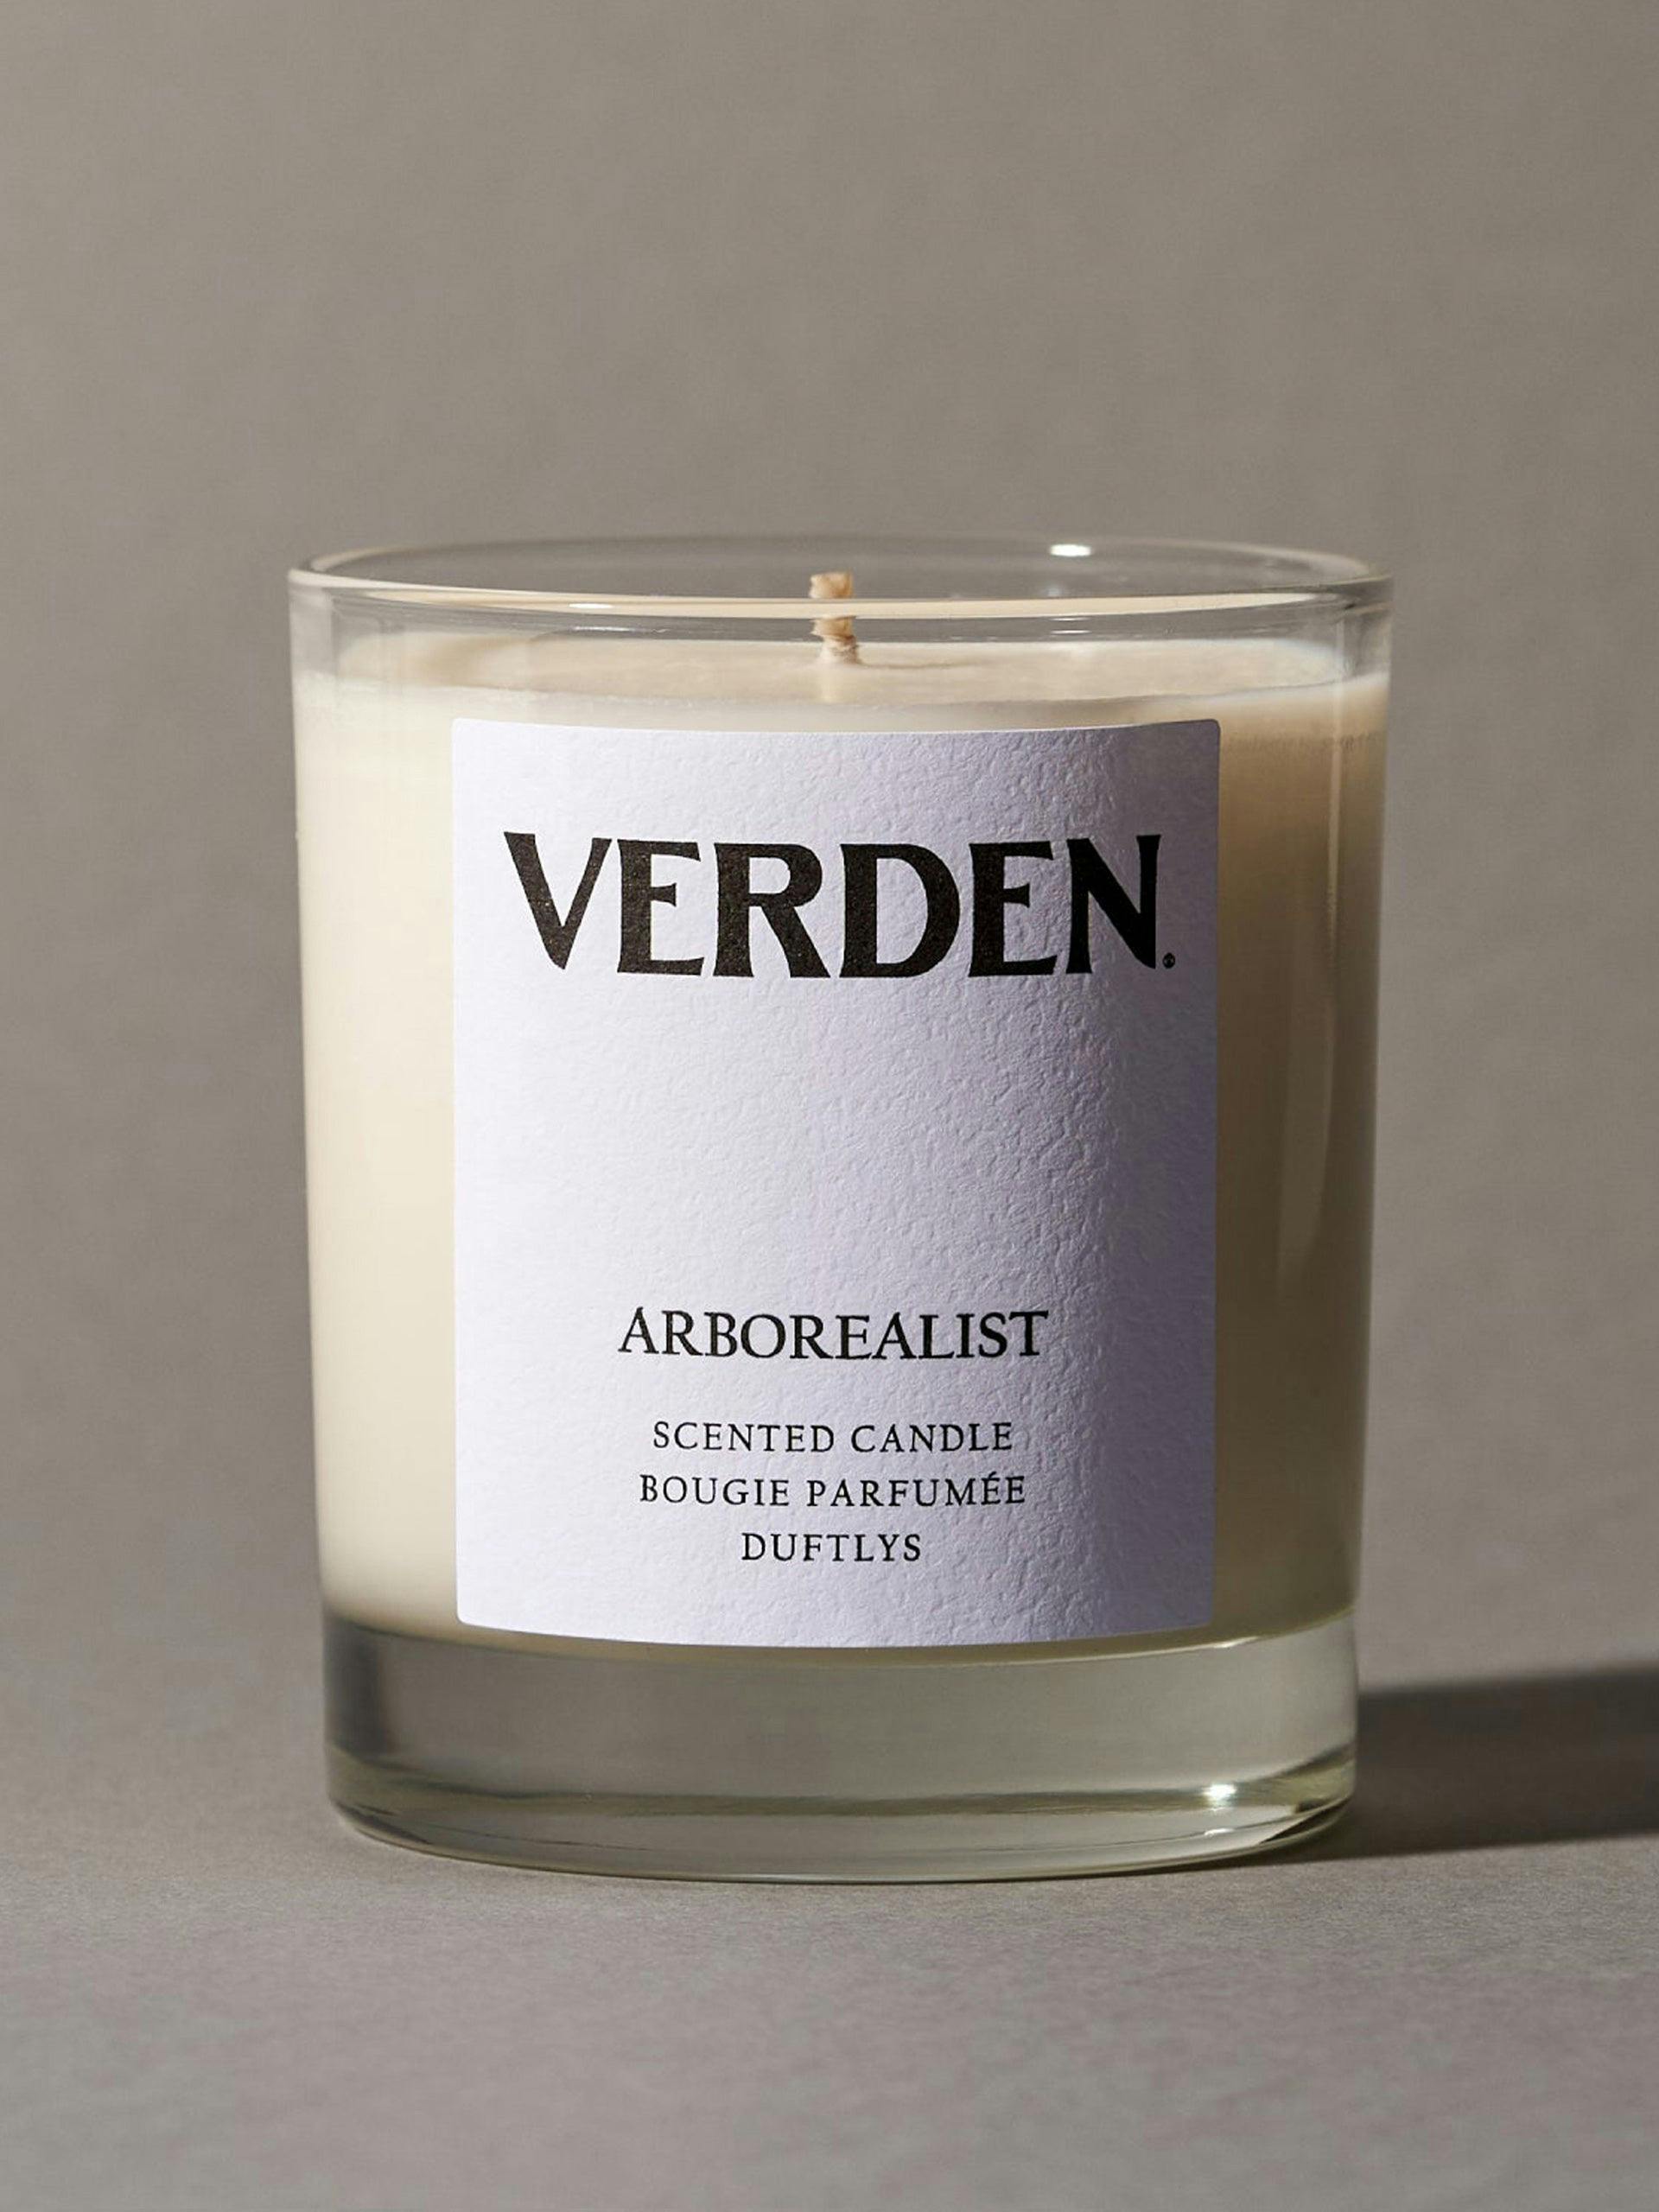 Arborealist scented candle